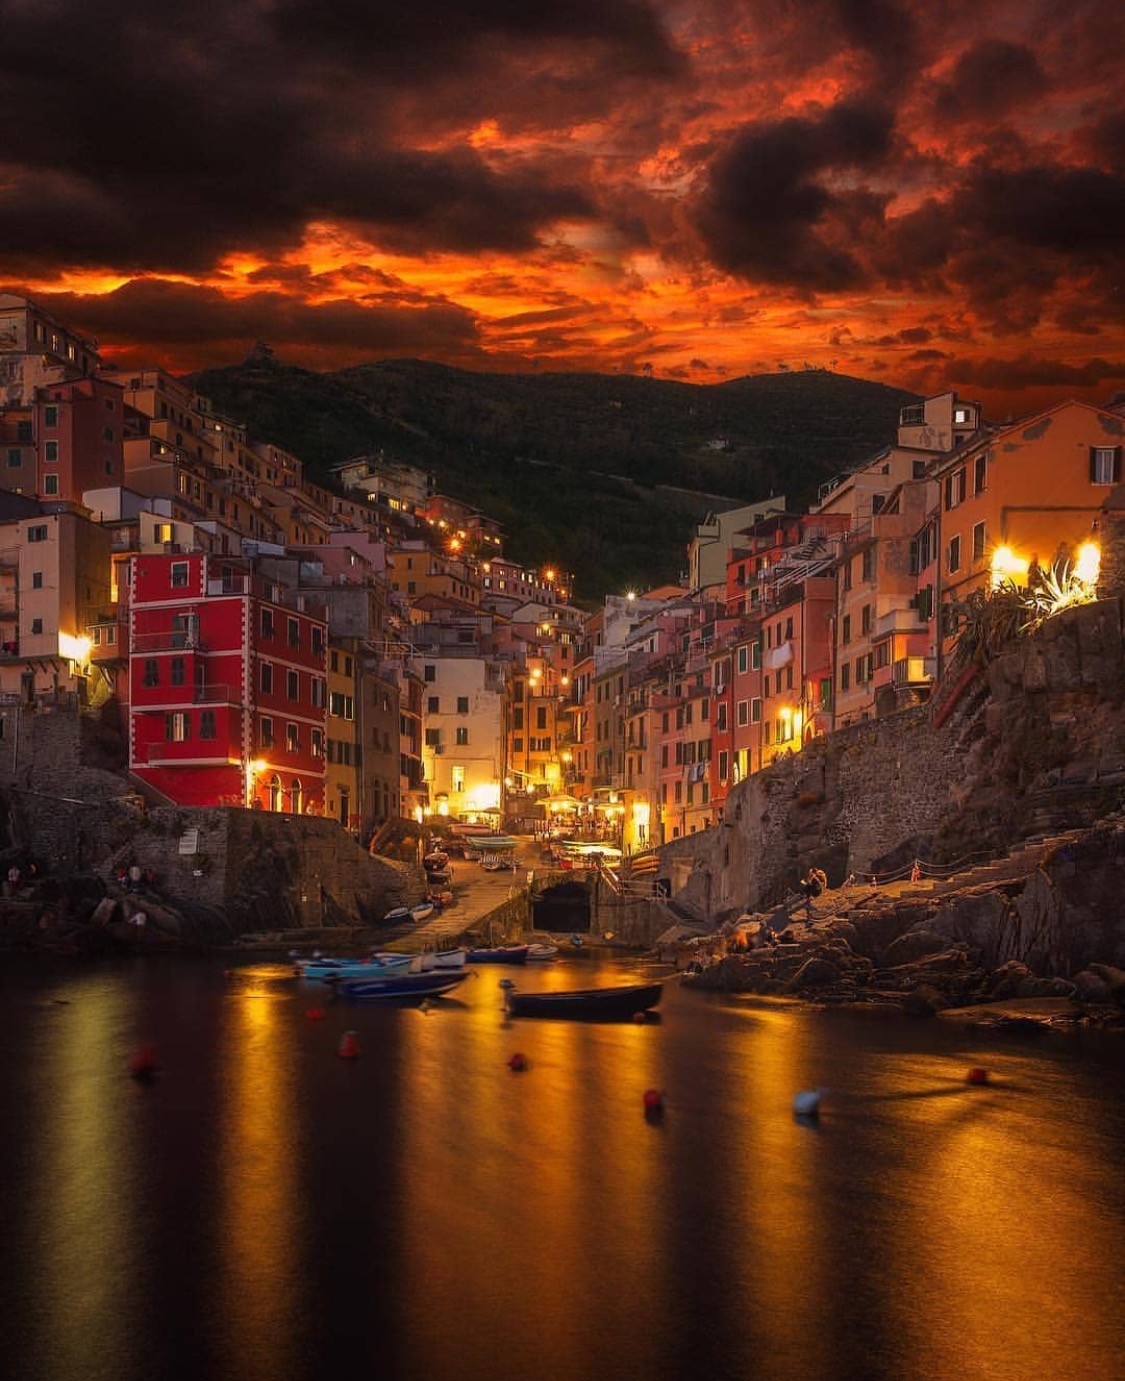 The 10 Most Beautiful Italian Coastal Towns and Cities